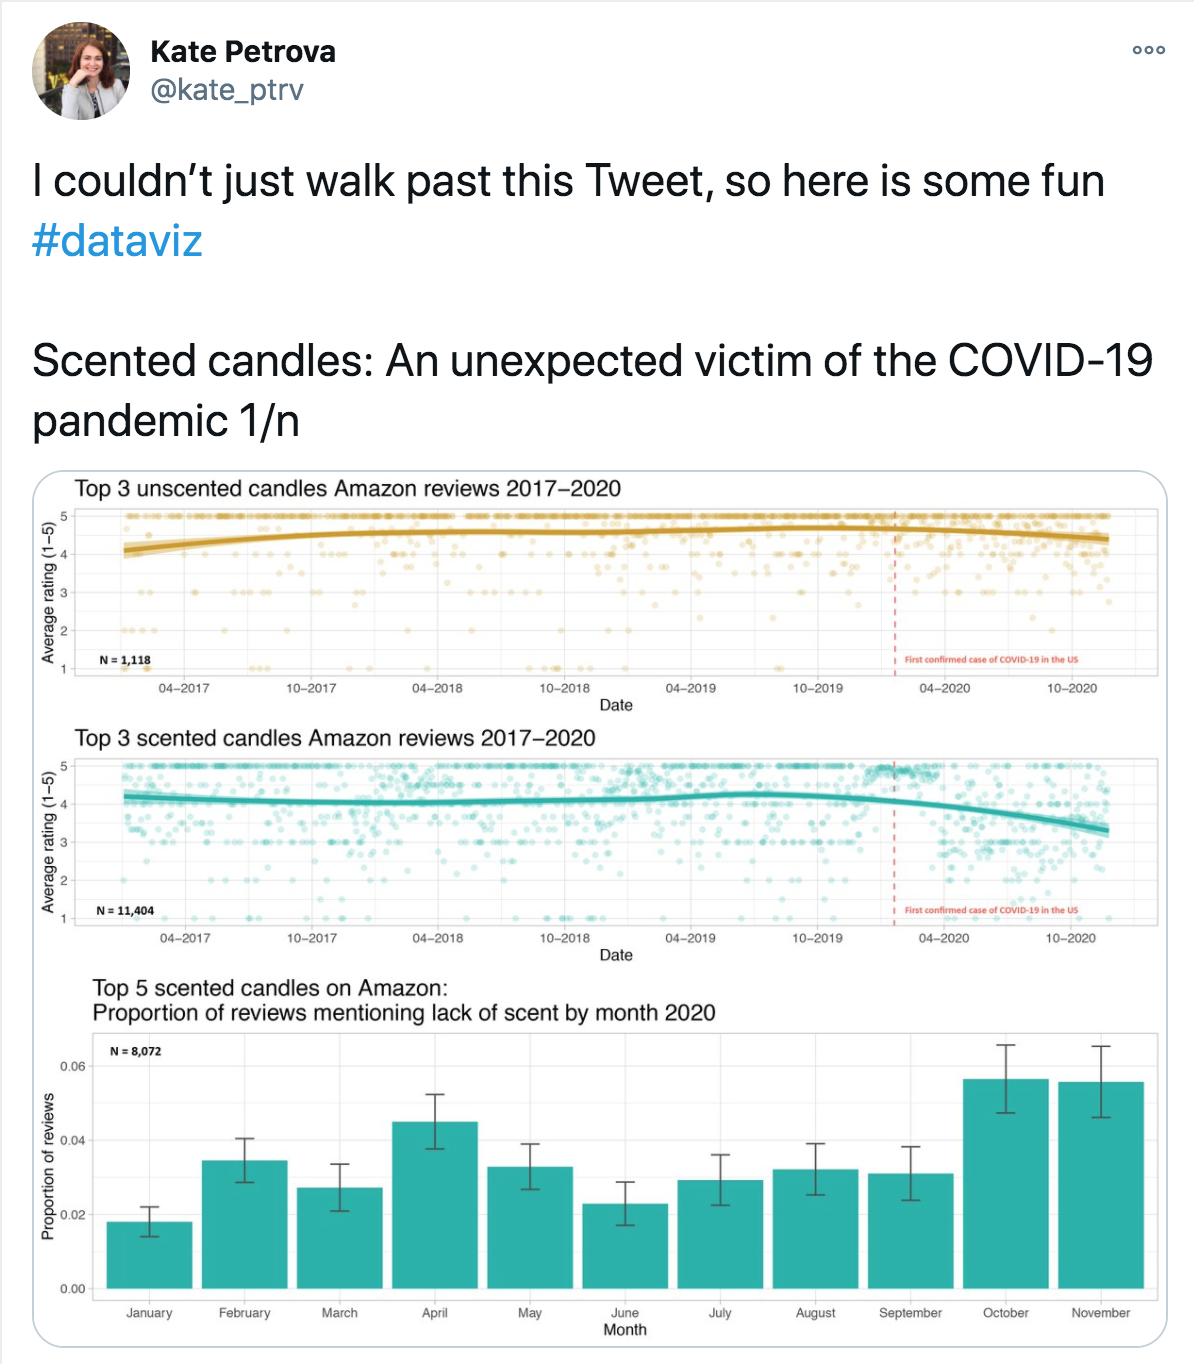 scented candle reviews covid - Kate Petrova I couldn't just walk past this Tweet, so here is some fun Scented candles An unexpected victim of the Covid19 pandemic 1n Top 3 unscented candles Amazon reviews 20172020 Dale Top 3 scented candles Amazon reviews